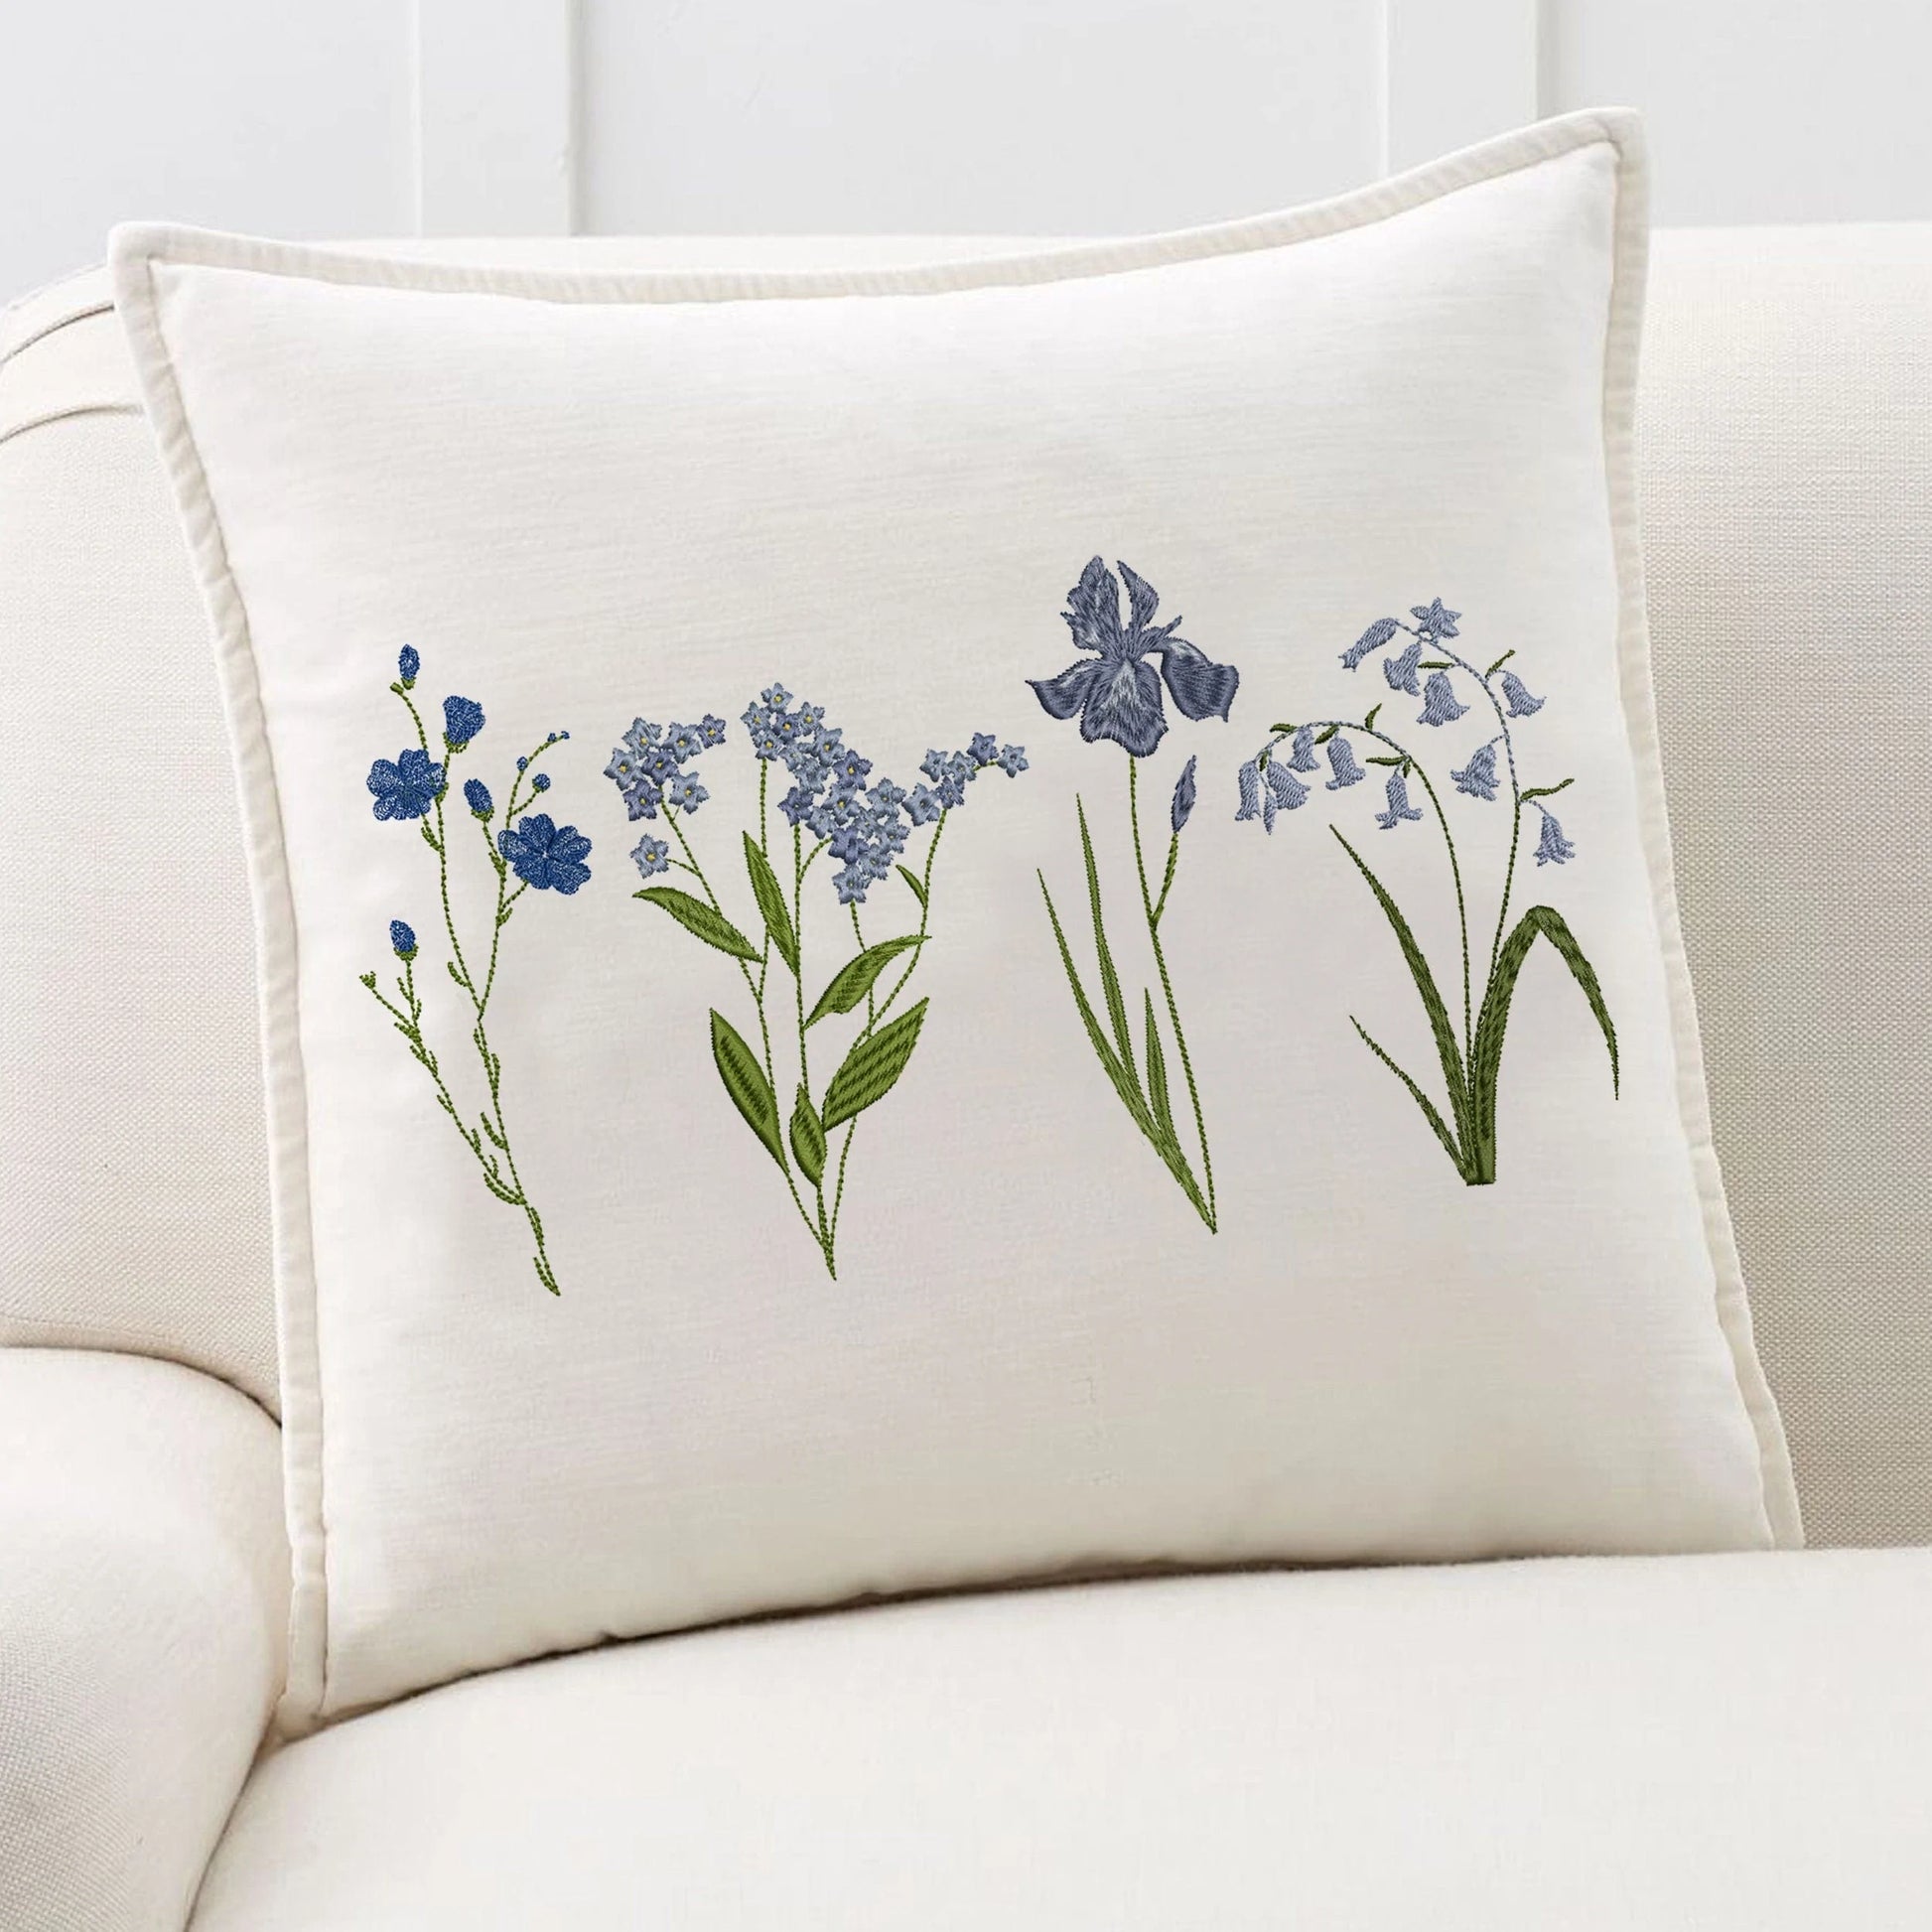 Blue wild flowers machine embroidery design on pillow